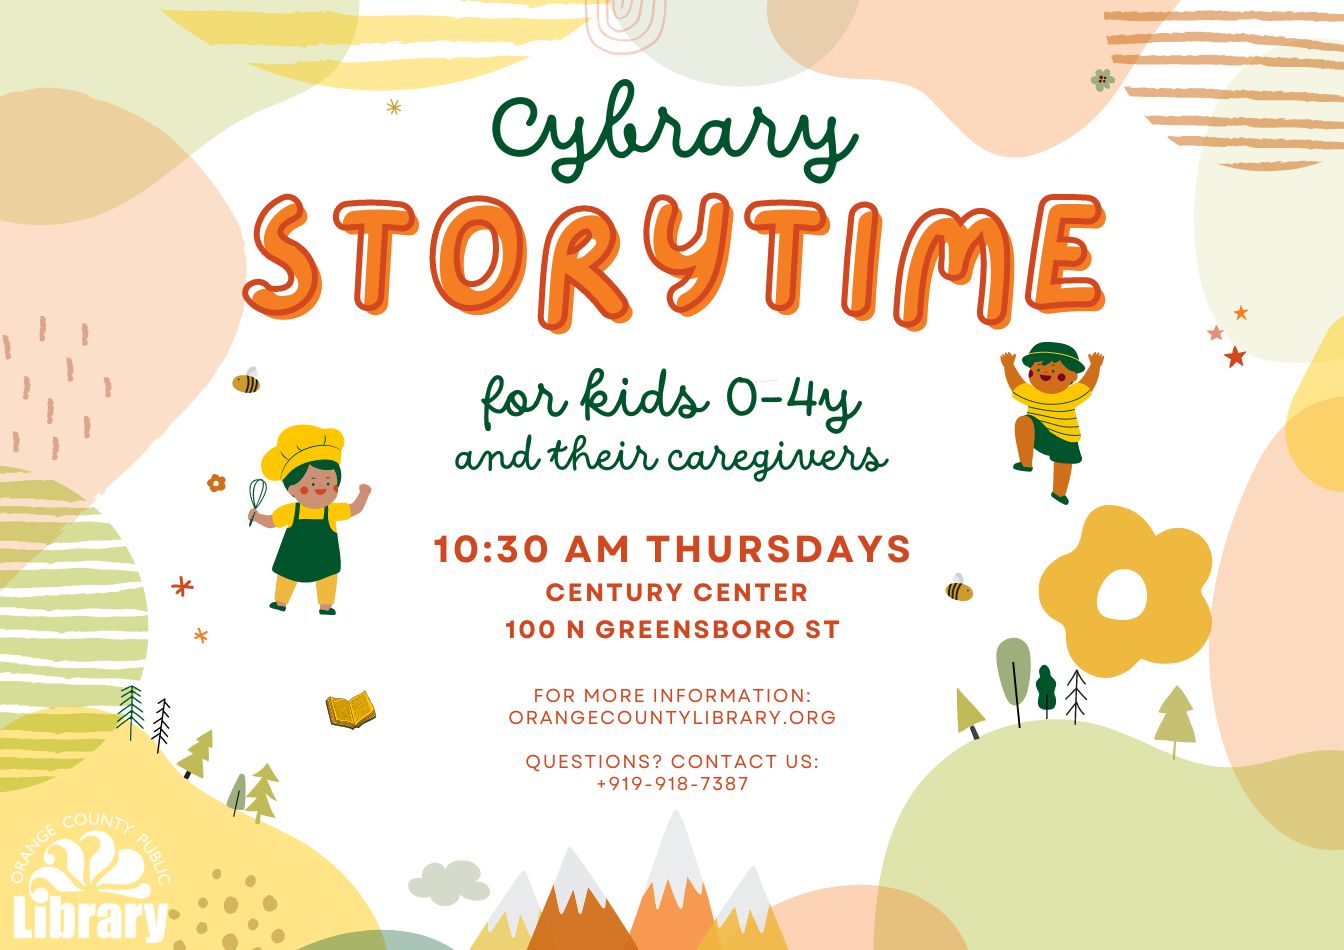 A green and orange flyer depicting cartoon children playing dress-up. Flyer text: Cybrary Storytime. For kids 0 to 4 years old and their caregivers. 10:30 am Thursdays. Century Center, 100 N Greensboro Street. For more information: Orangecountylibrary.org. Questions? Contact us: 919-918-7387.